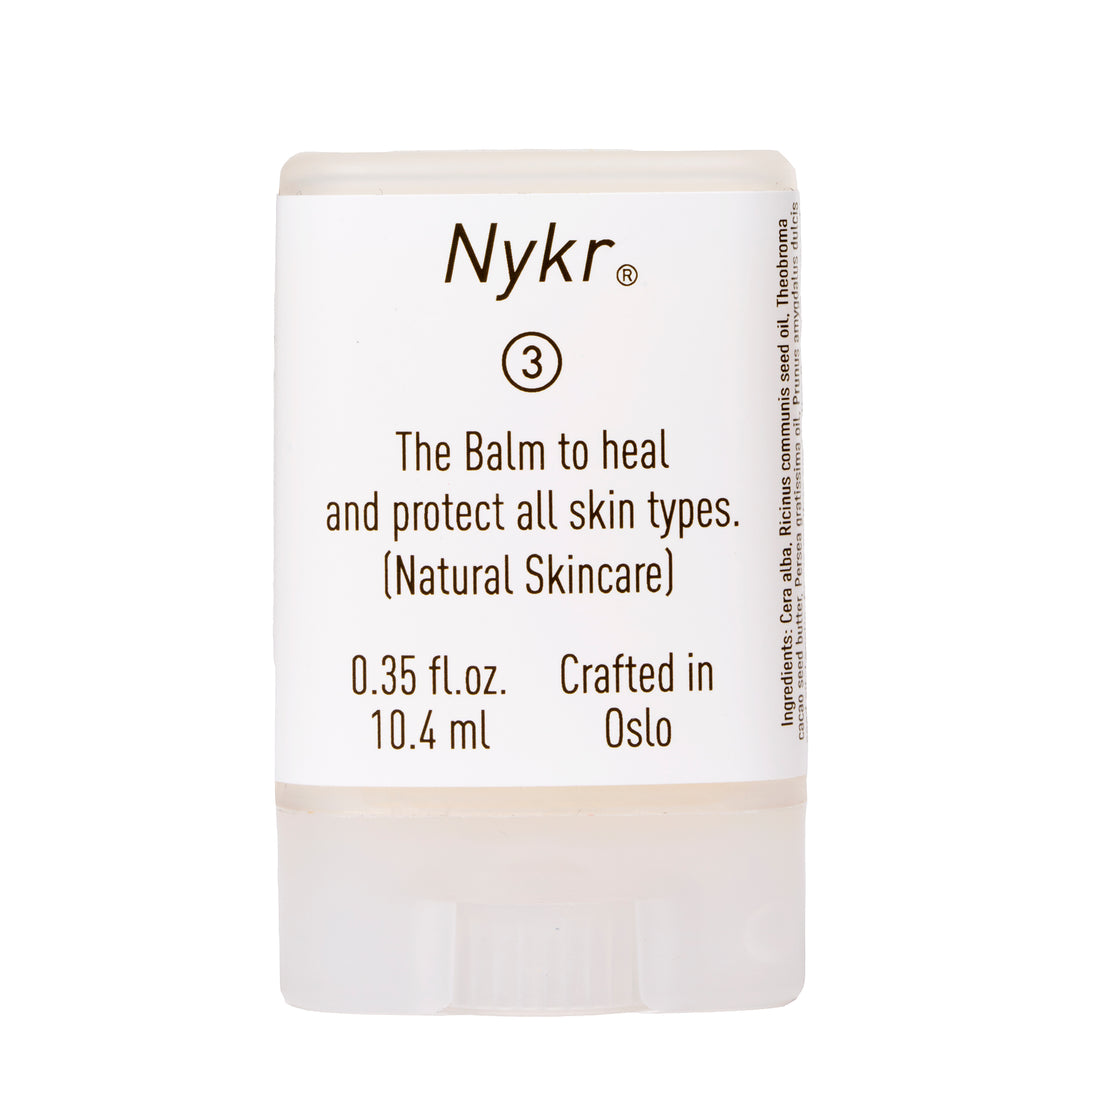 Nykr The Balm